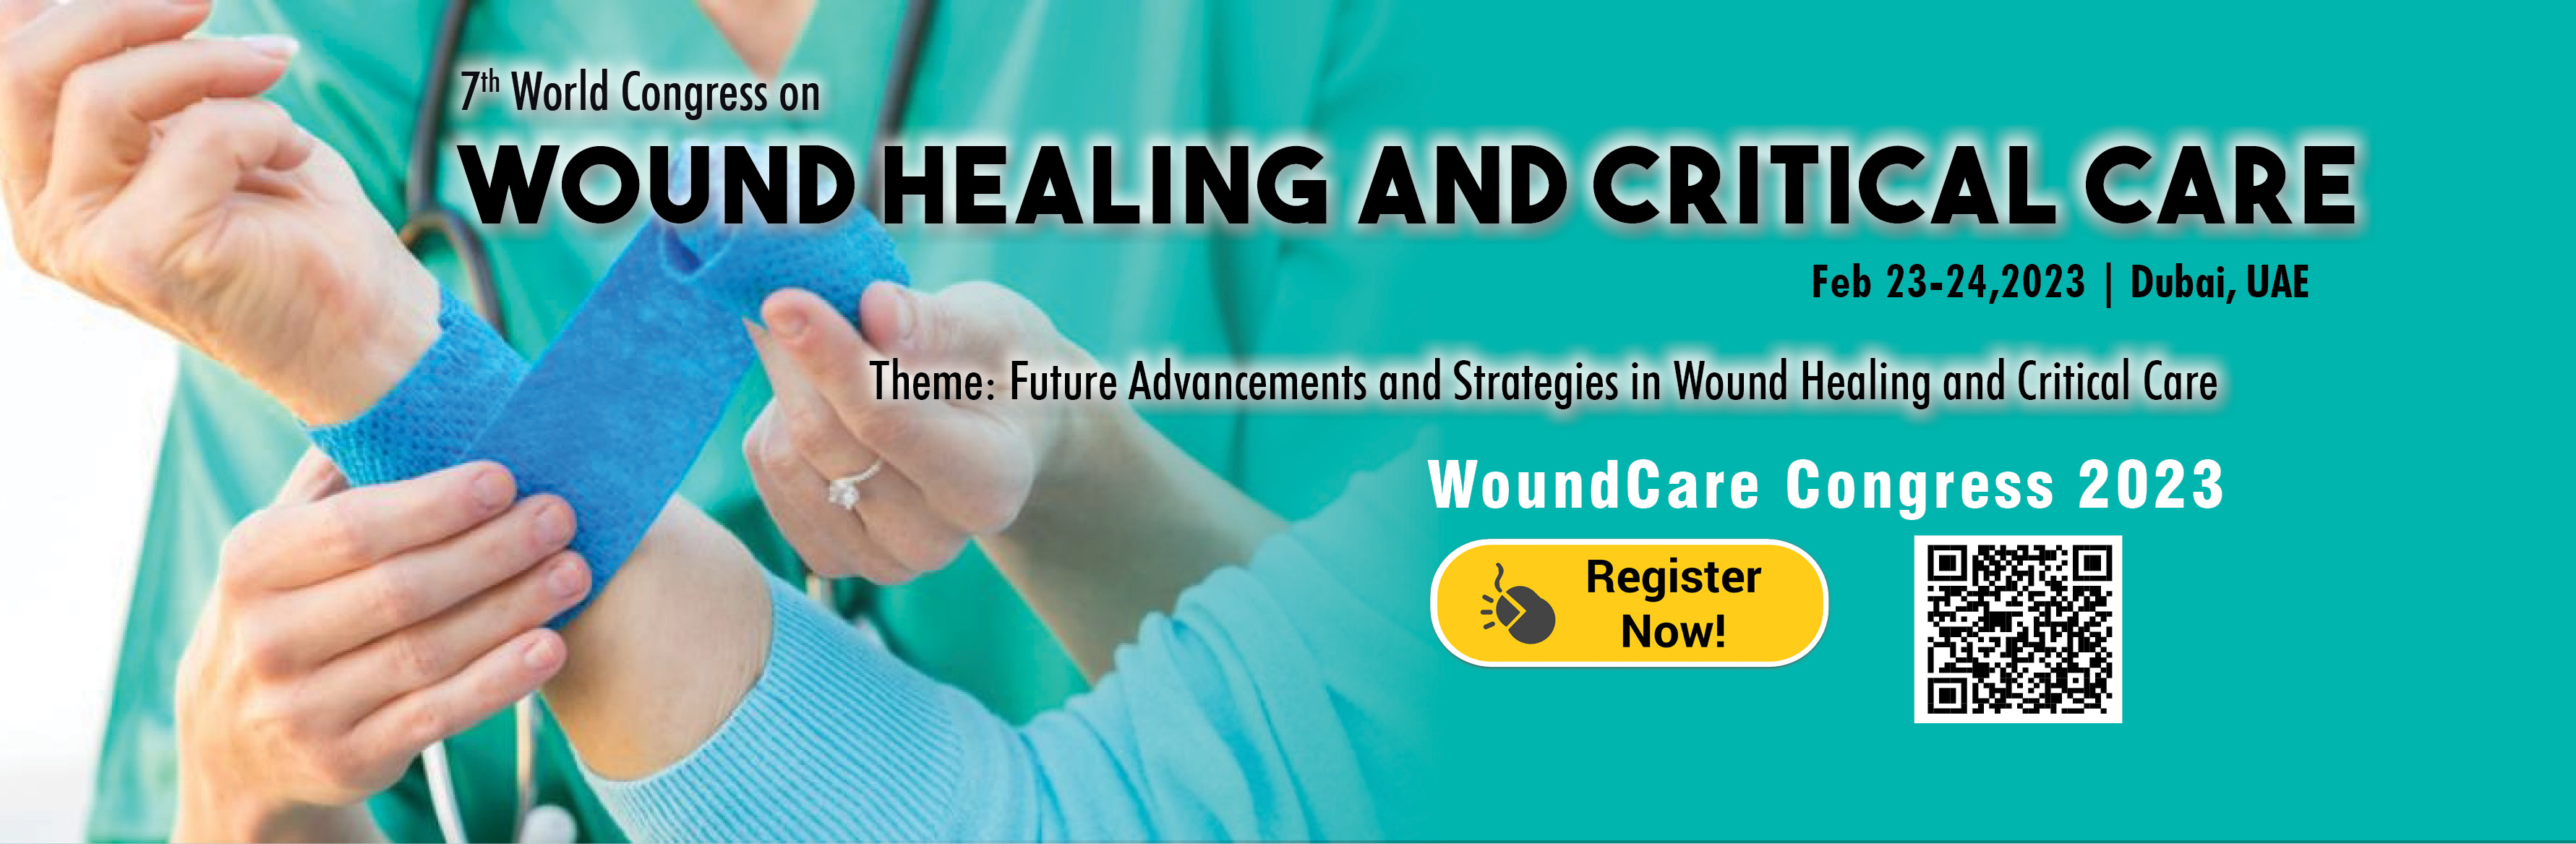 Wound care Conferences 2023 Tissue Repair Conference Wound Healing